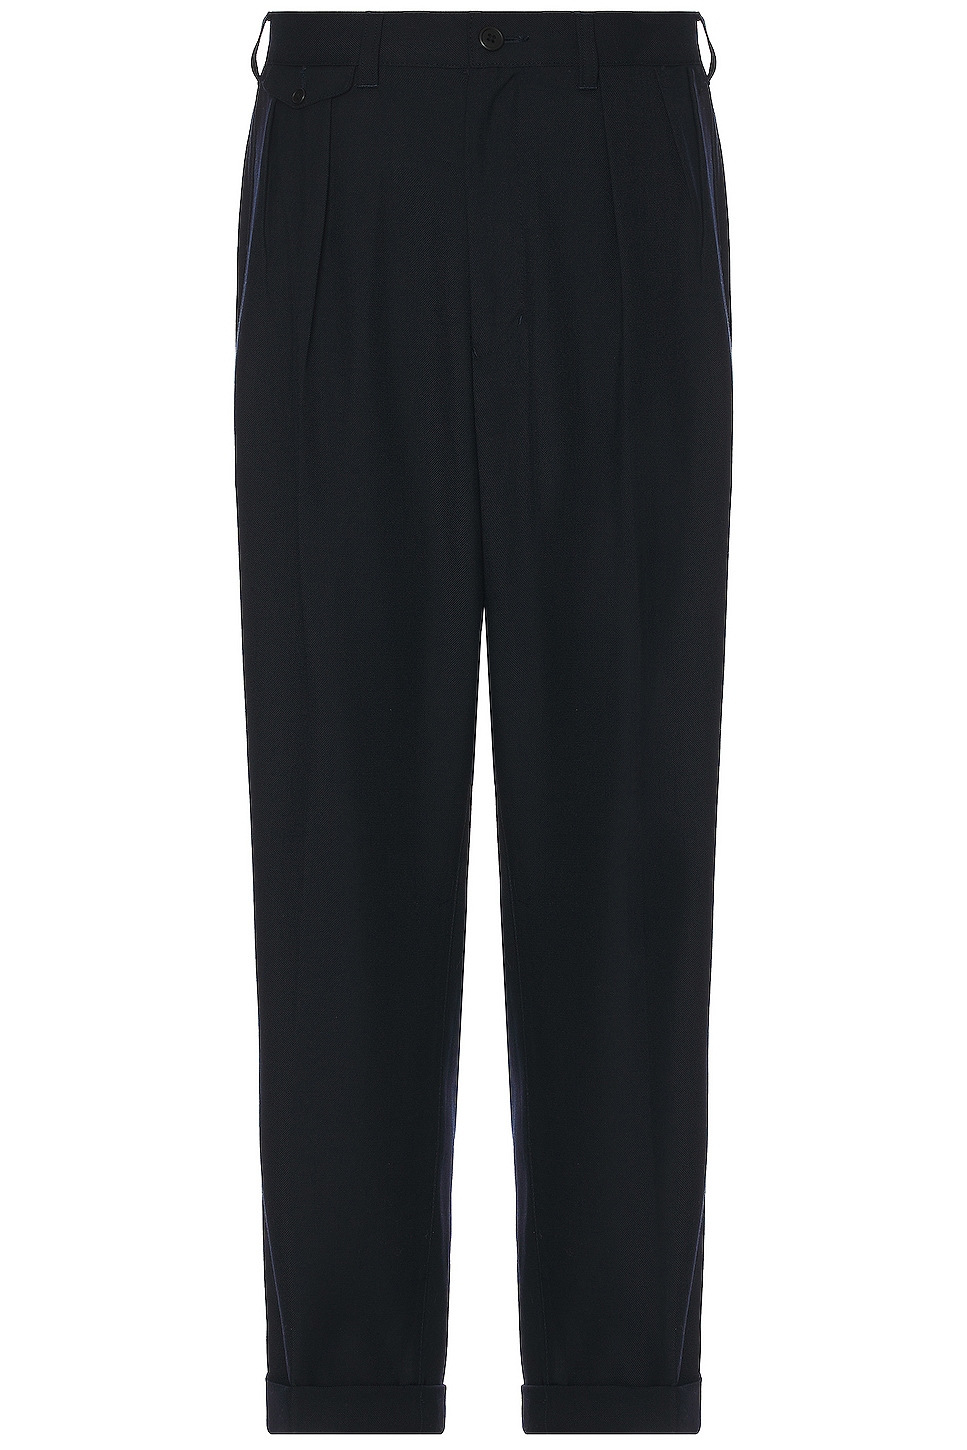 Image 1 of Beams Plus 2 Pleats Trousers in Navy